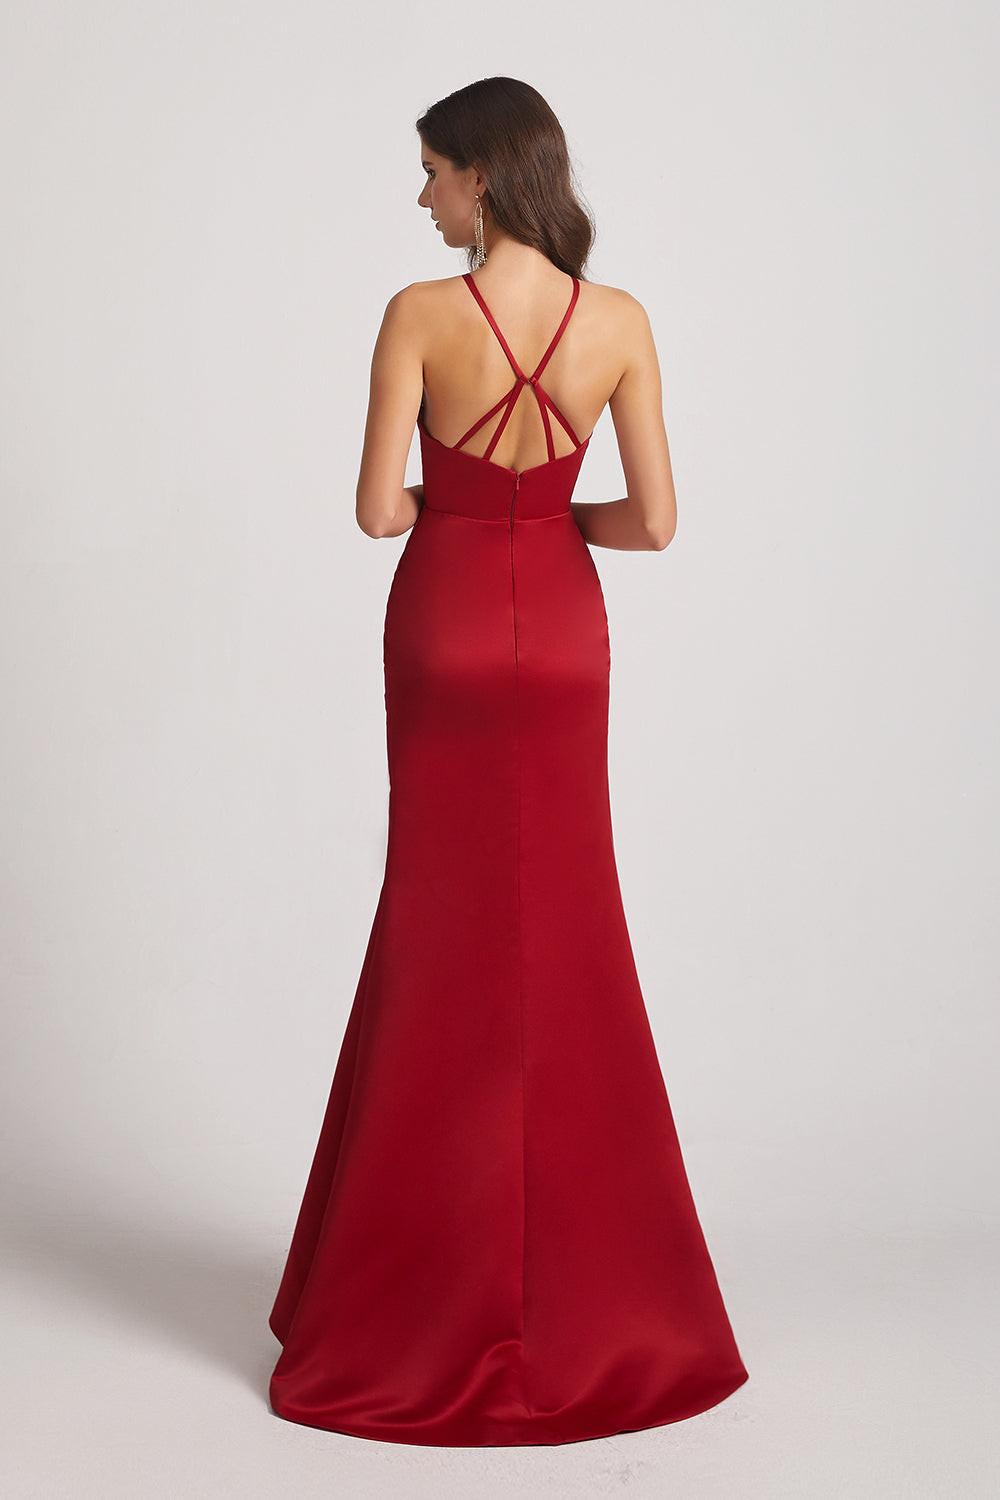 open back red maids of honor dresses